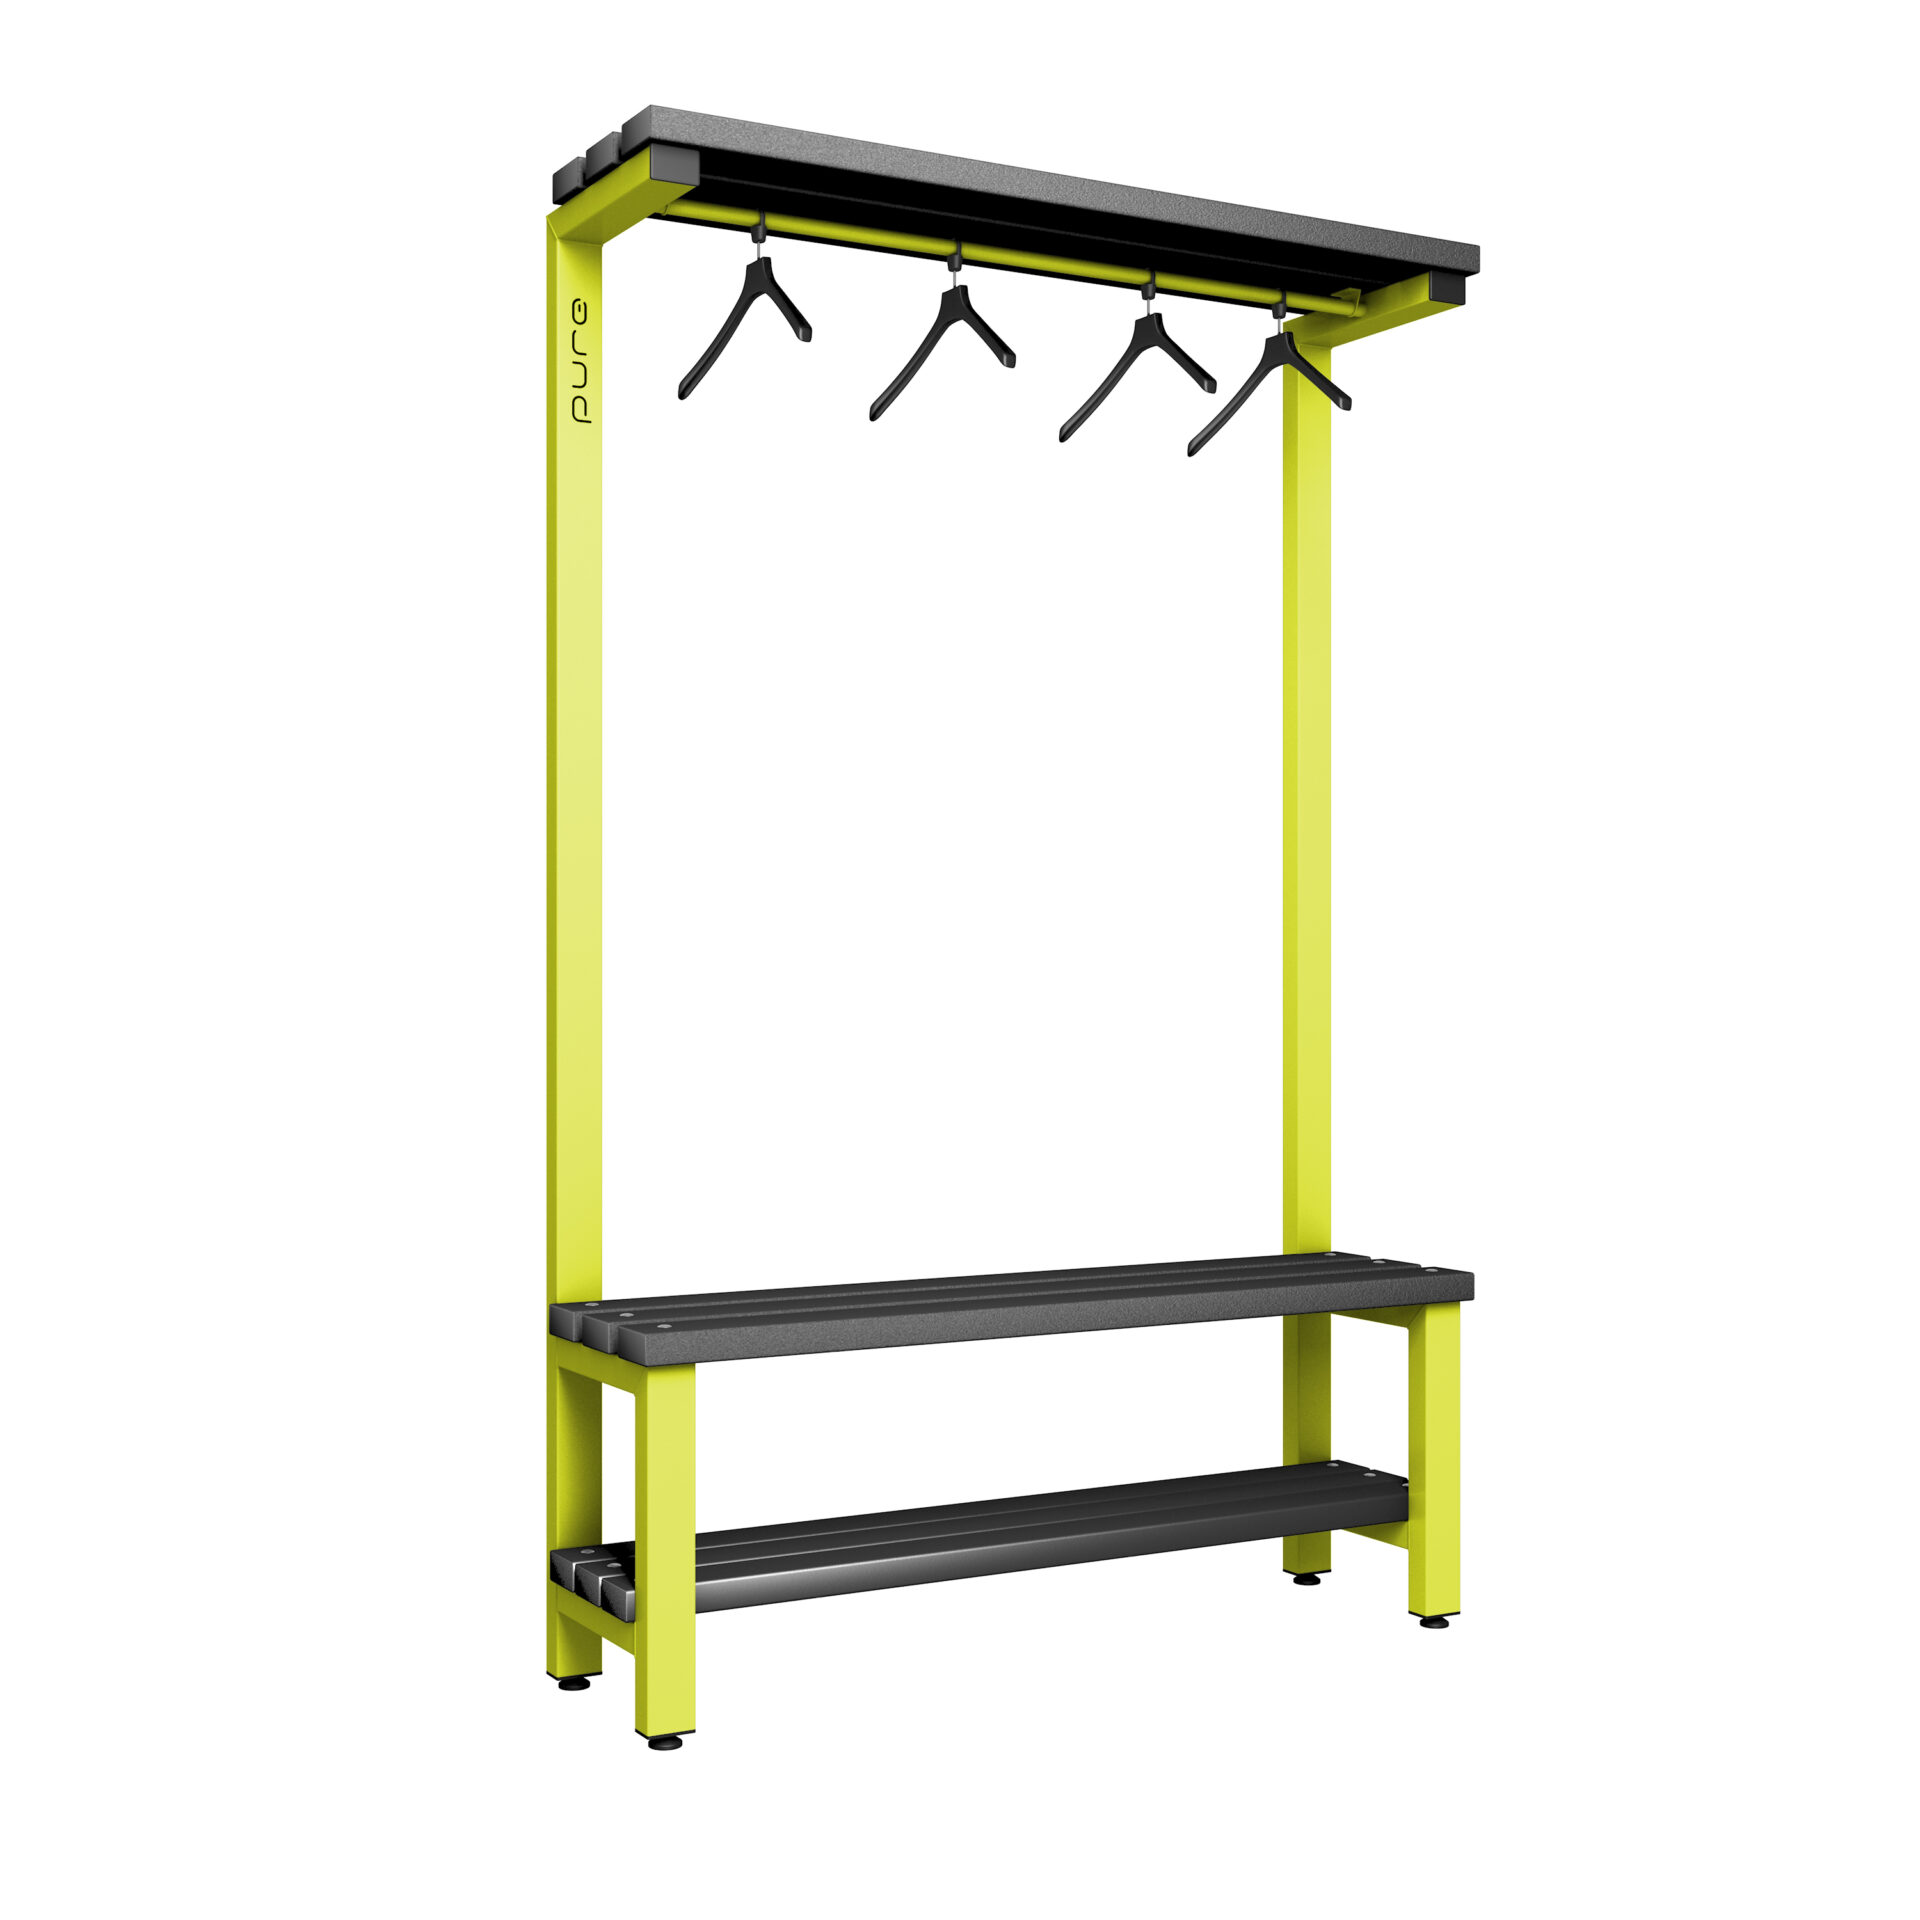 Pure Carbon Zero Single Sided 1200mm Overhead Hanging Bench With Shoe Shelf